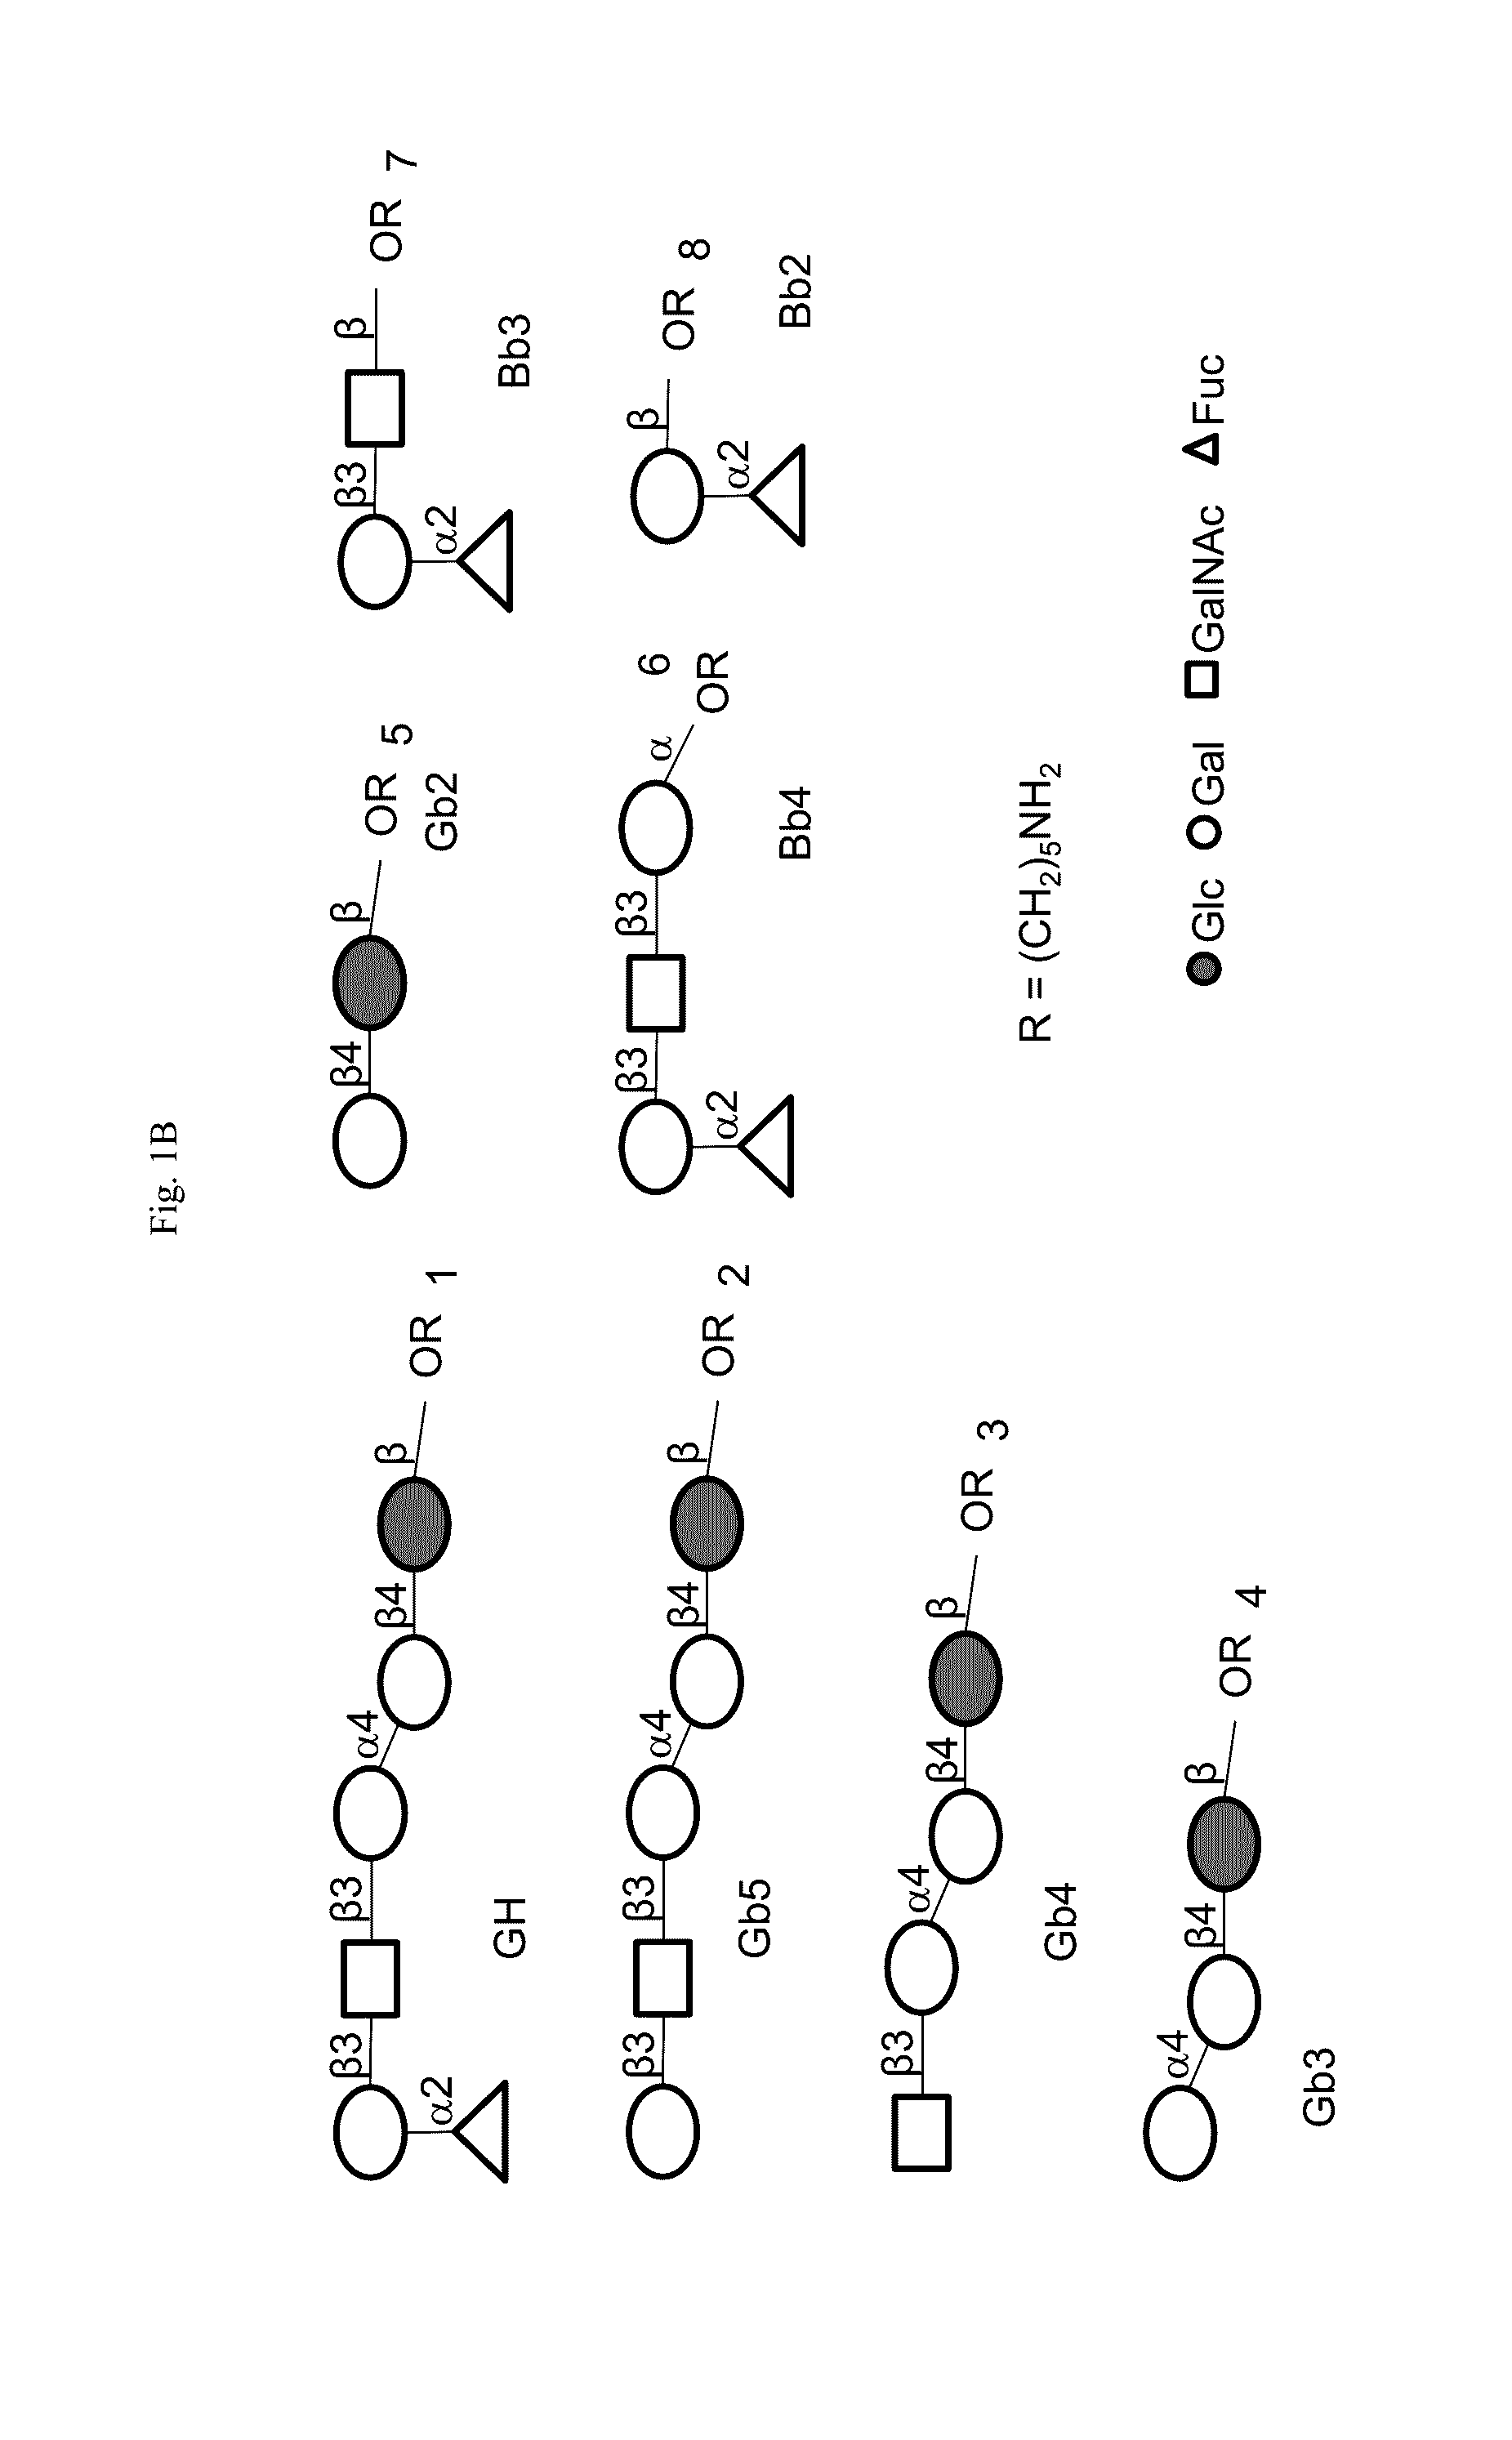 Immunogenic/therapeutic glycoconjugate compositions and uses thereof